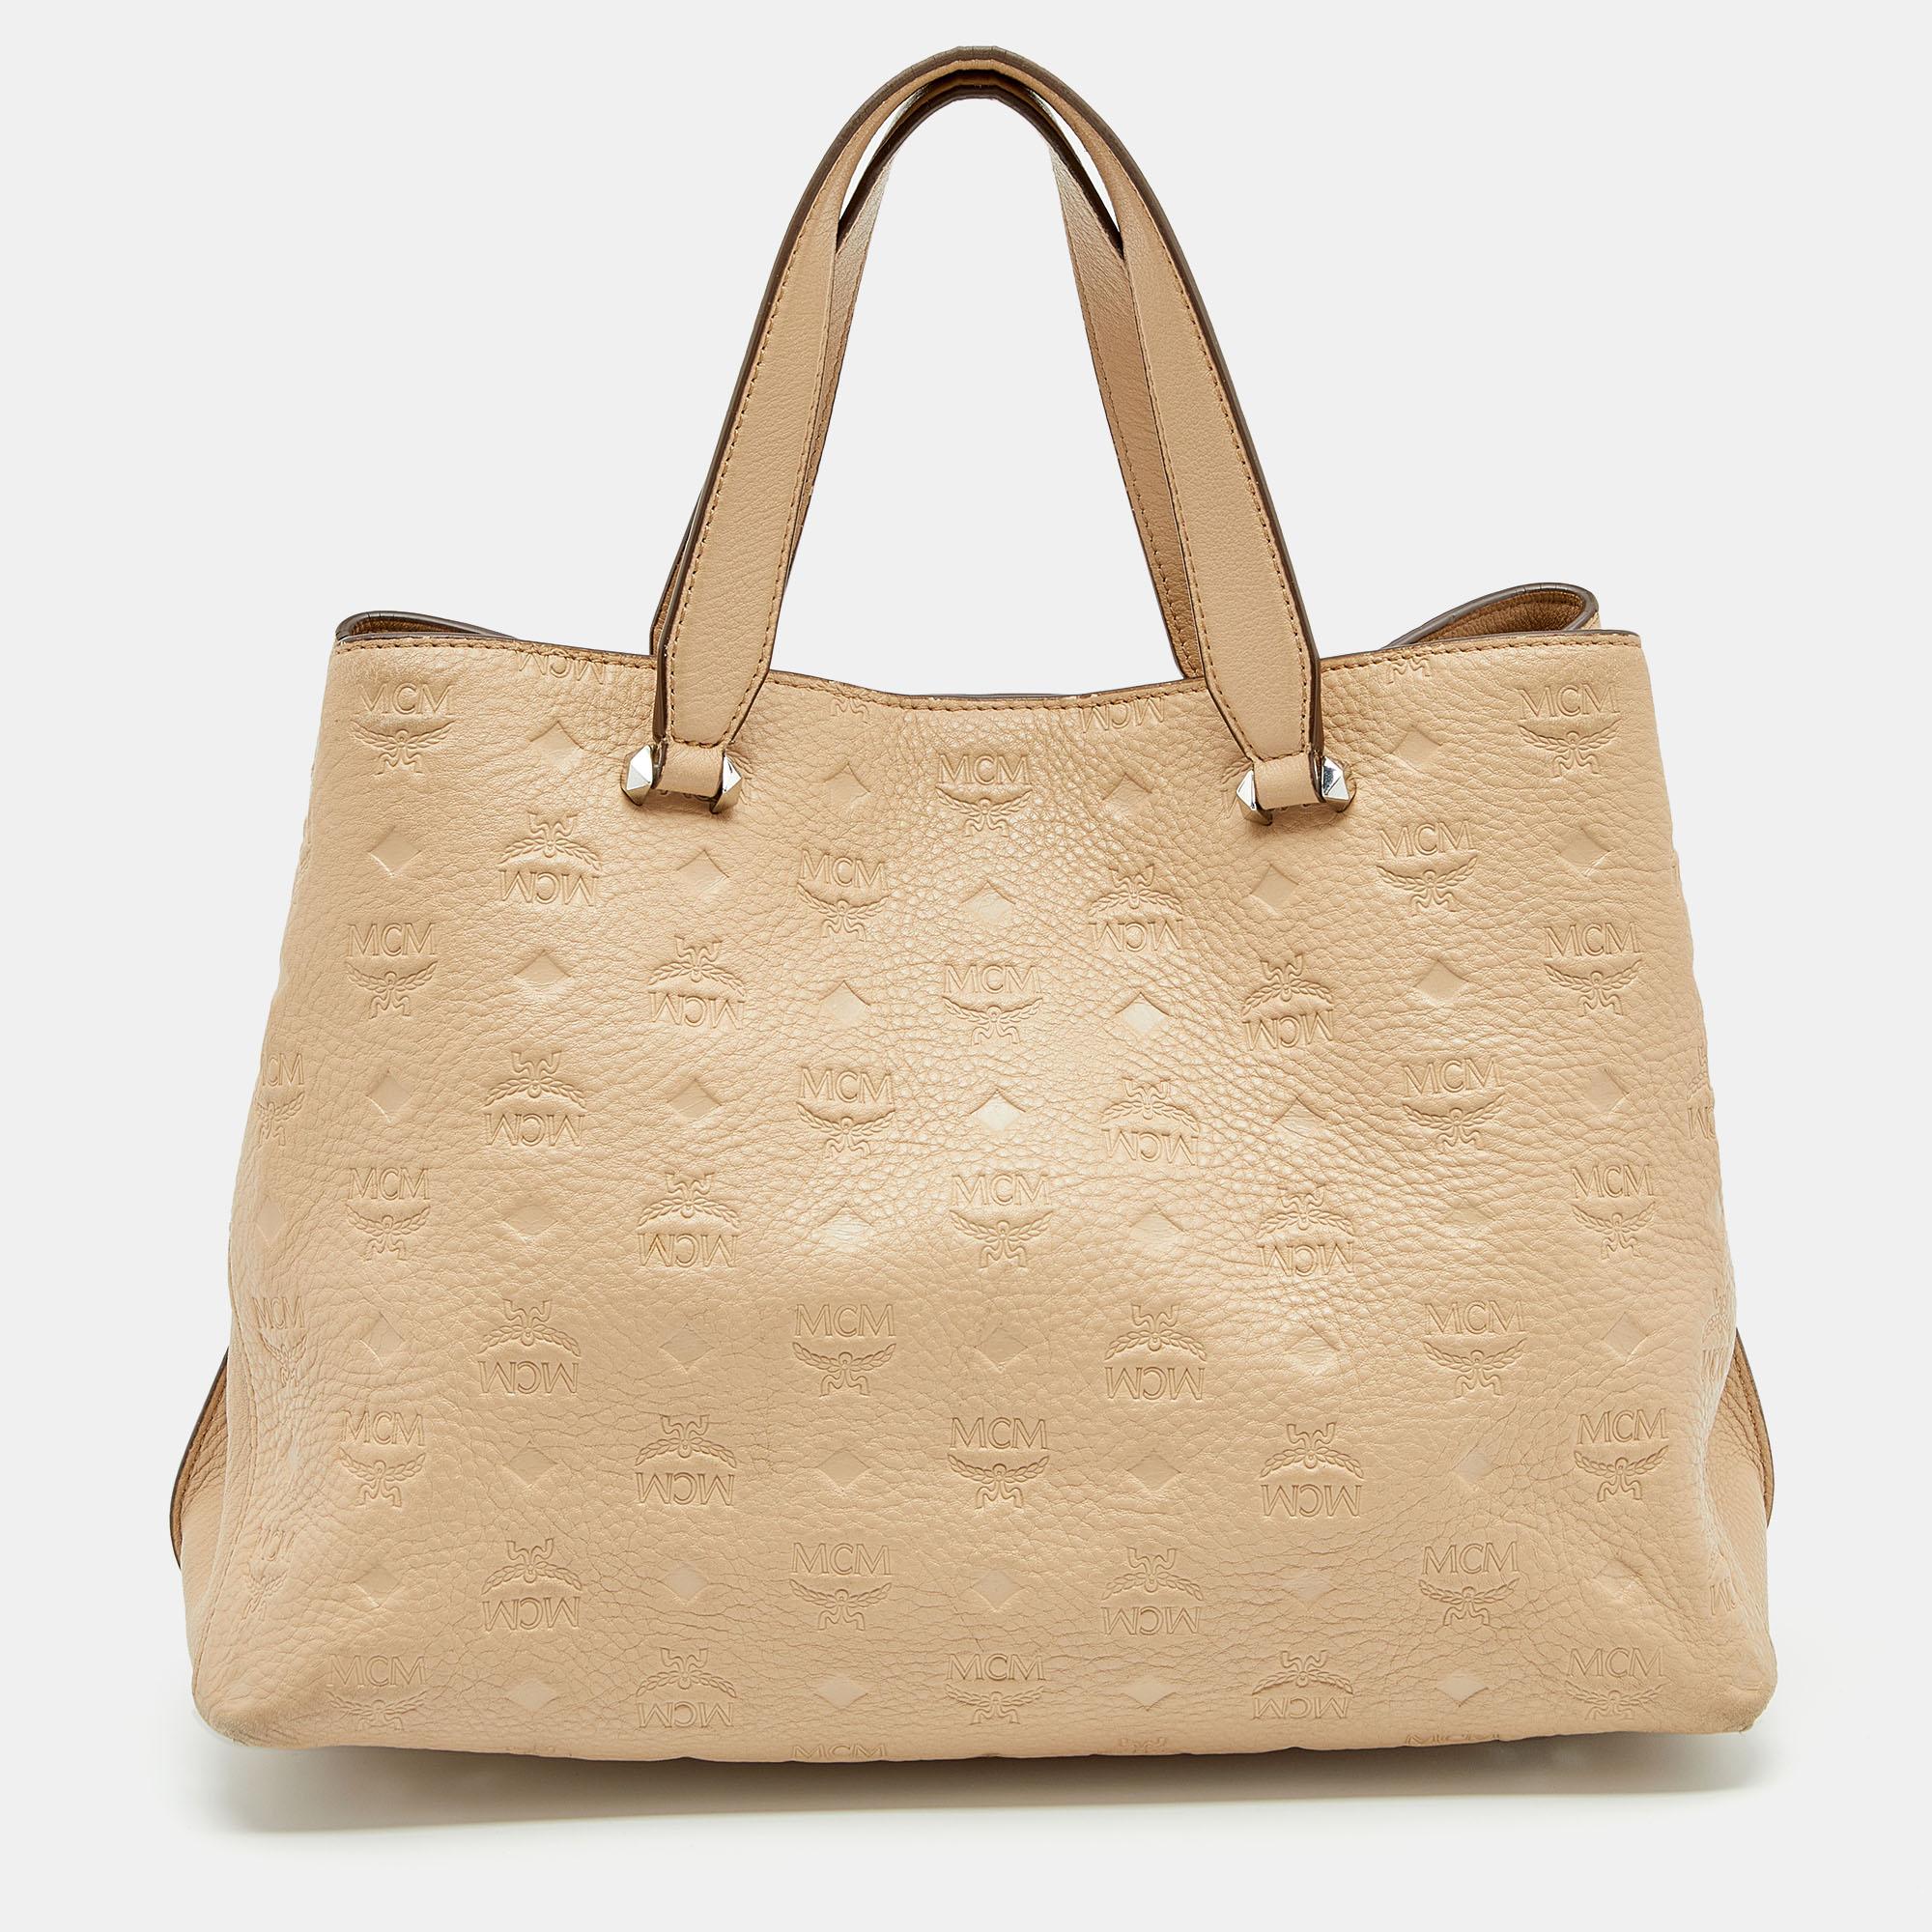 Coming from MCM is this beige tote that is the perfect day bag. It is crafted from leather into a structured shape and flaunts silver-tone details, dual handles, and a turn-lock closure that reveals a capacious interior for your belongings. The tote